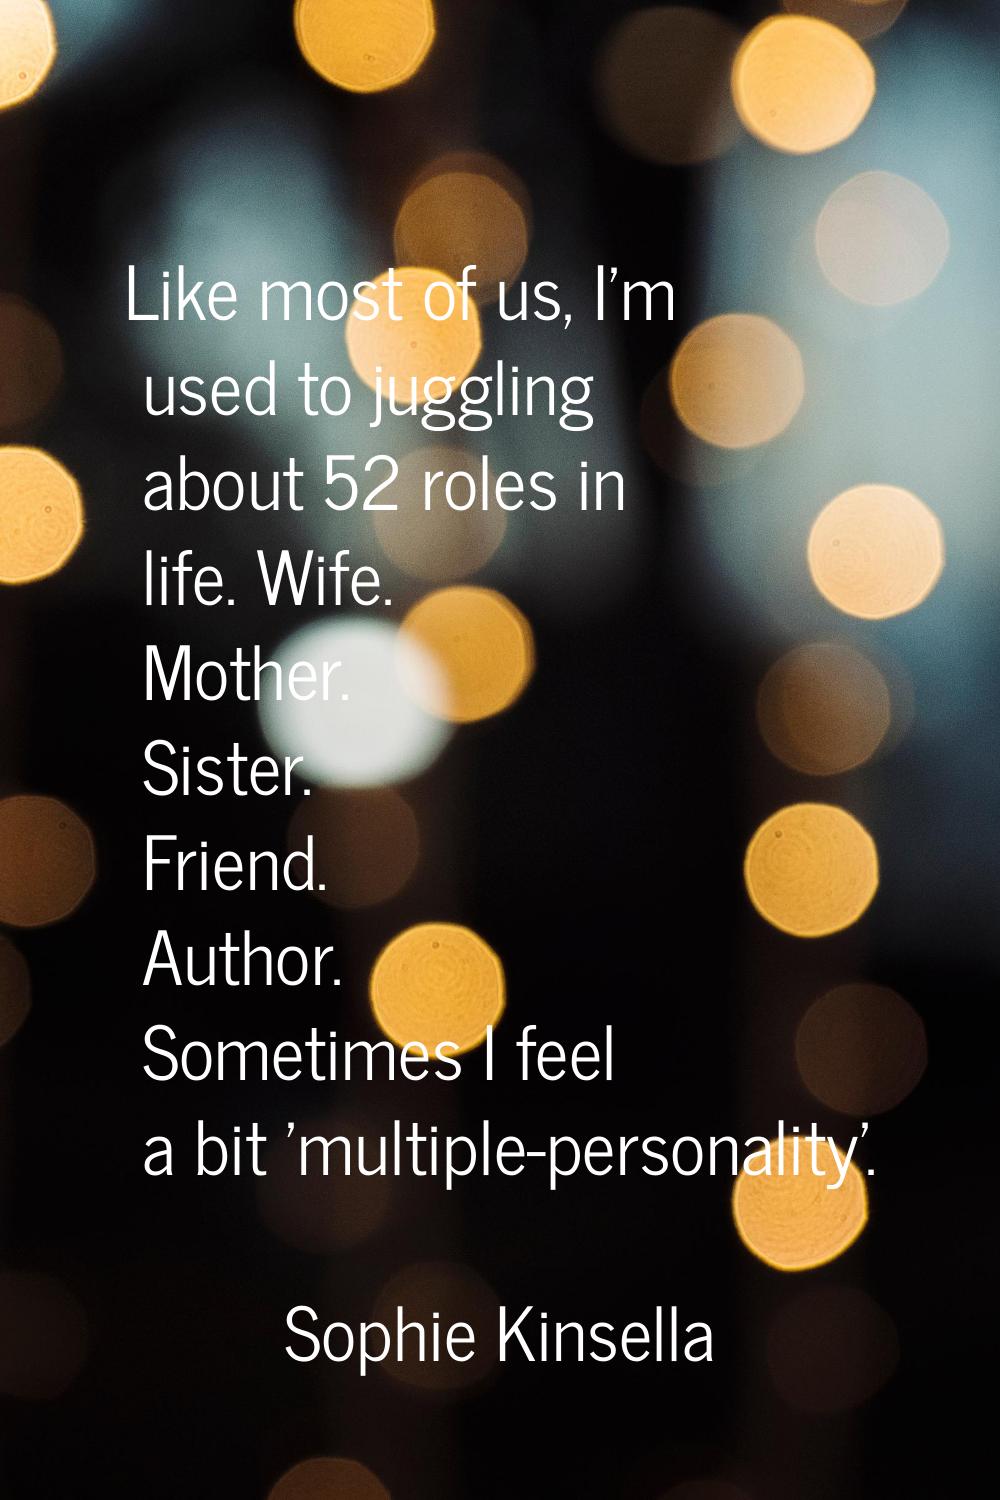 Like most of us, I'm used to juggling about 52 roles in life. Wife. Mother. Sister. Friend. Author.